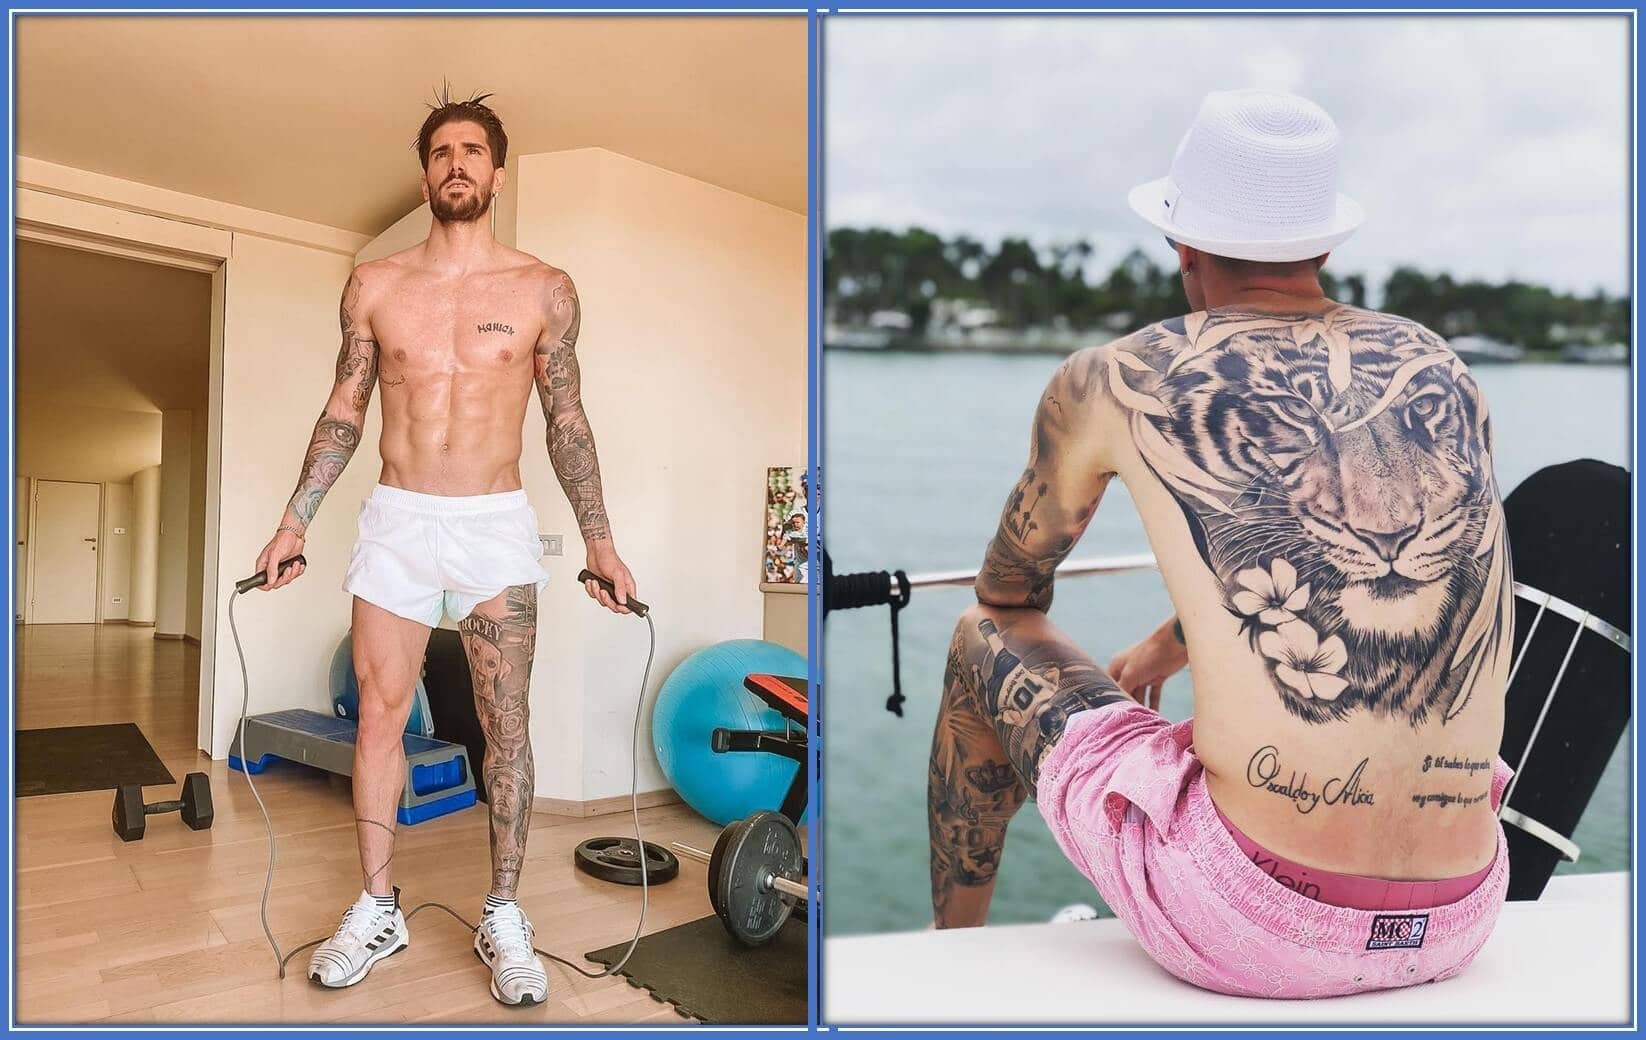 Check out the beautiful pieces of tattoos he has on his body.